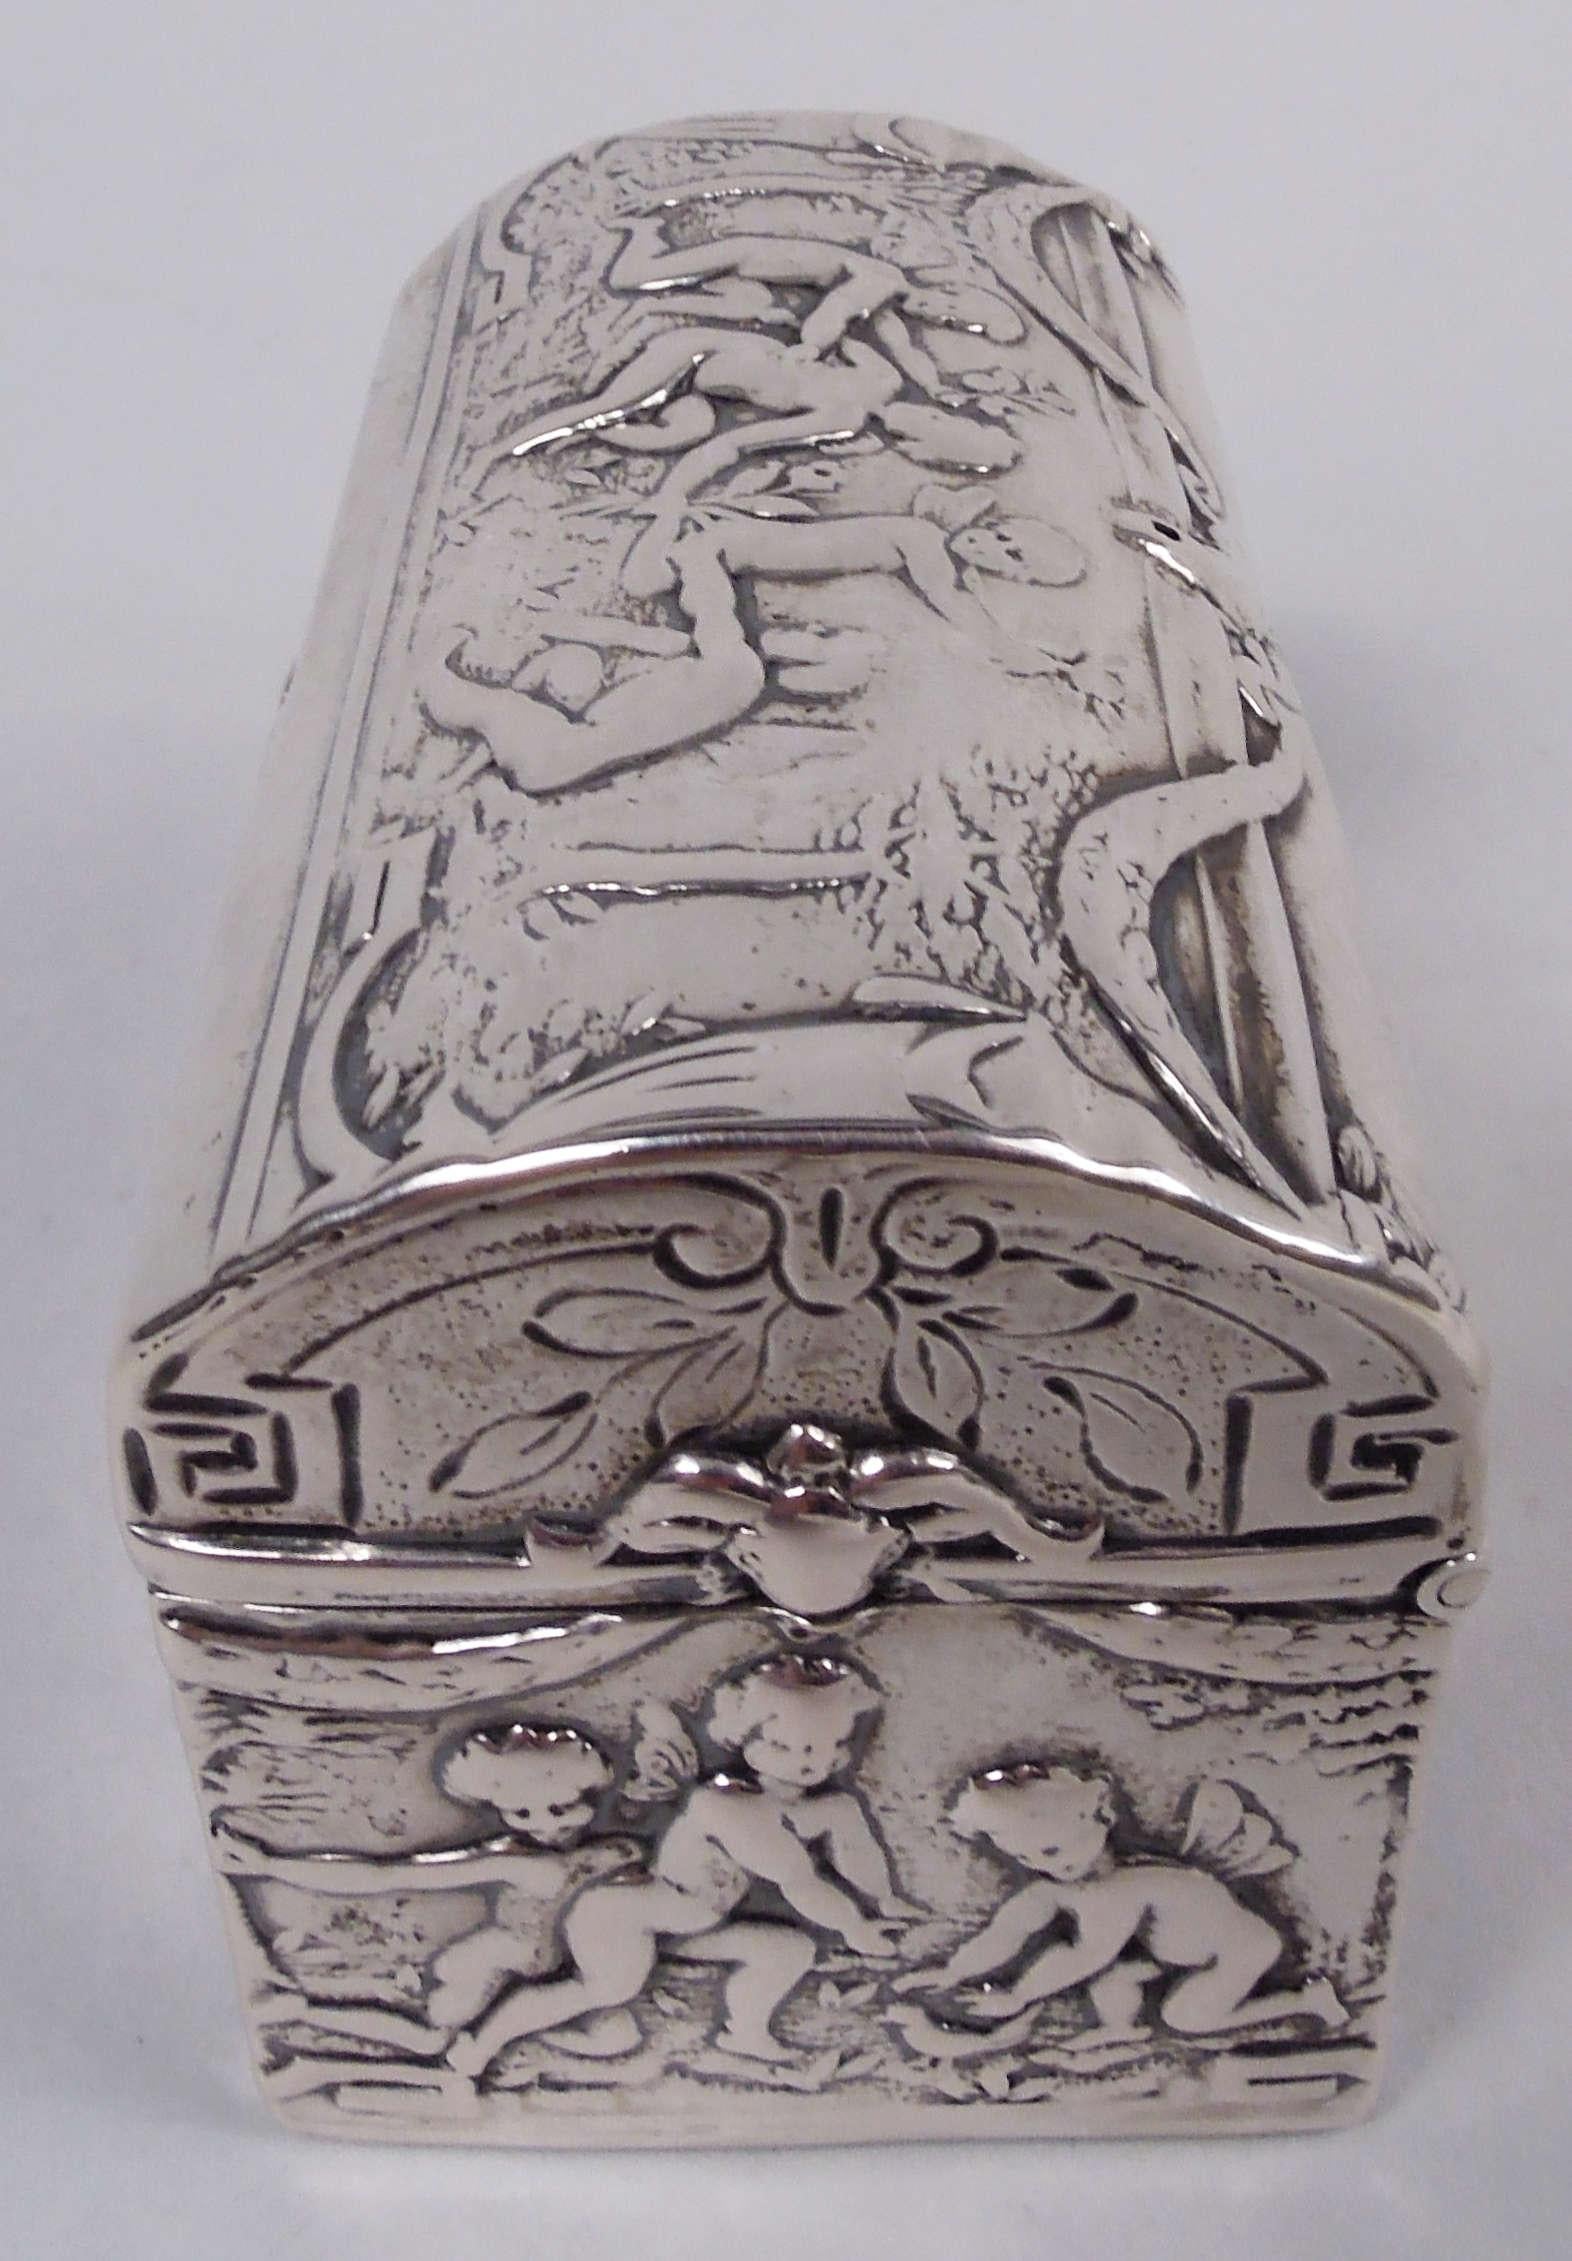 German Rococo 800 silver casket, ca 1900. Rectangular with straight sides and sharp corners. Cover hinged with curved top. Chased scenes of frolicking cherubs in nature. Hanau marks. Weight: 1.8 troy ounces. 